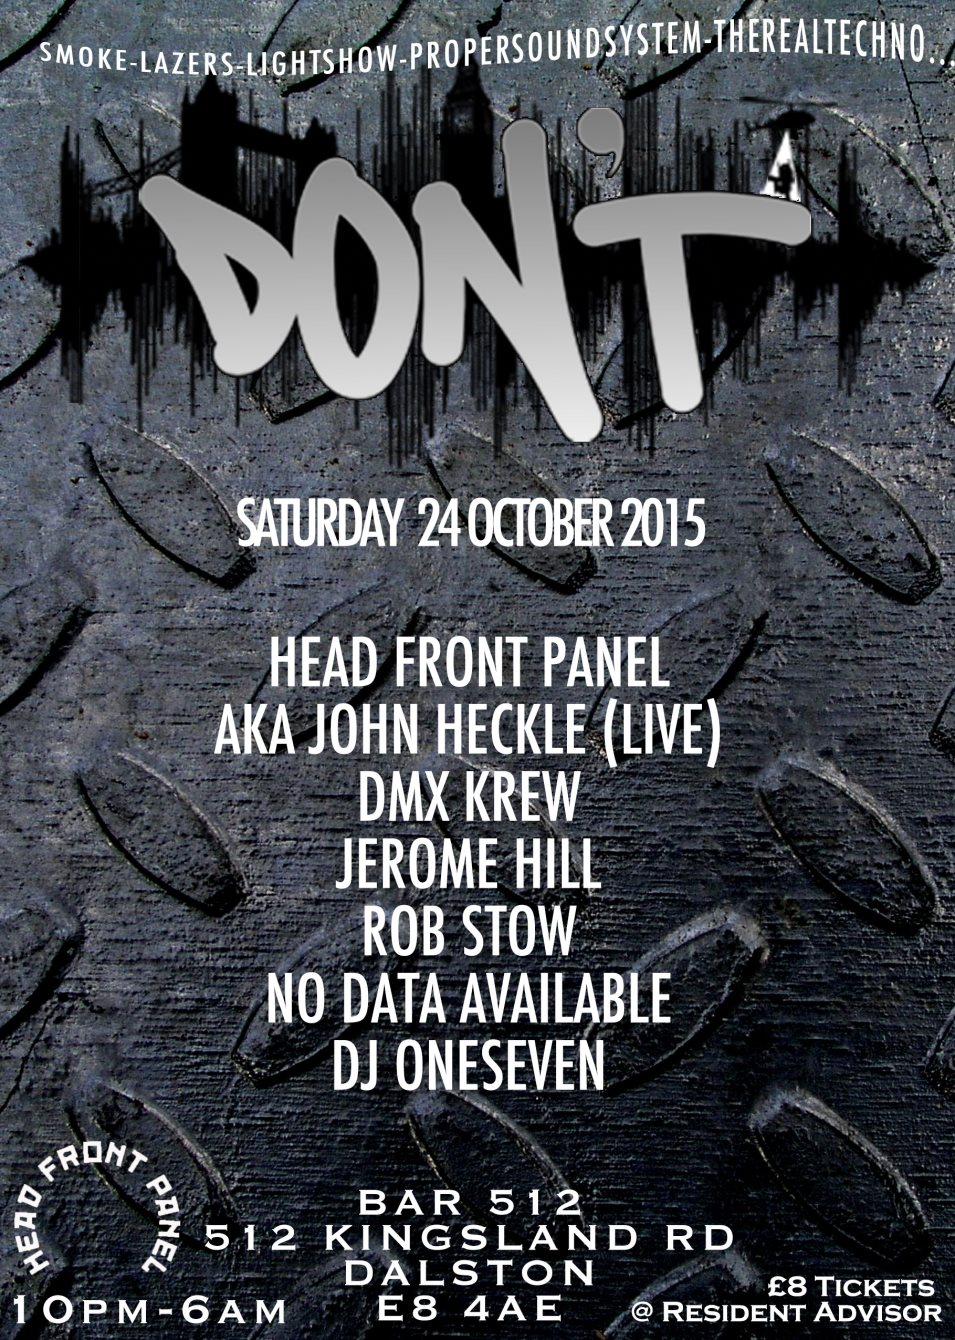 Don't - The Real Techno: John Heckle / Head Front Panel Live + DMX Krew + Jerome Hill - Flyer front